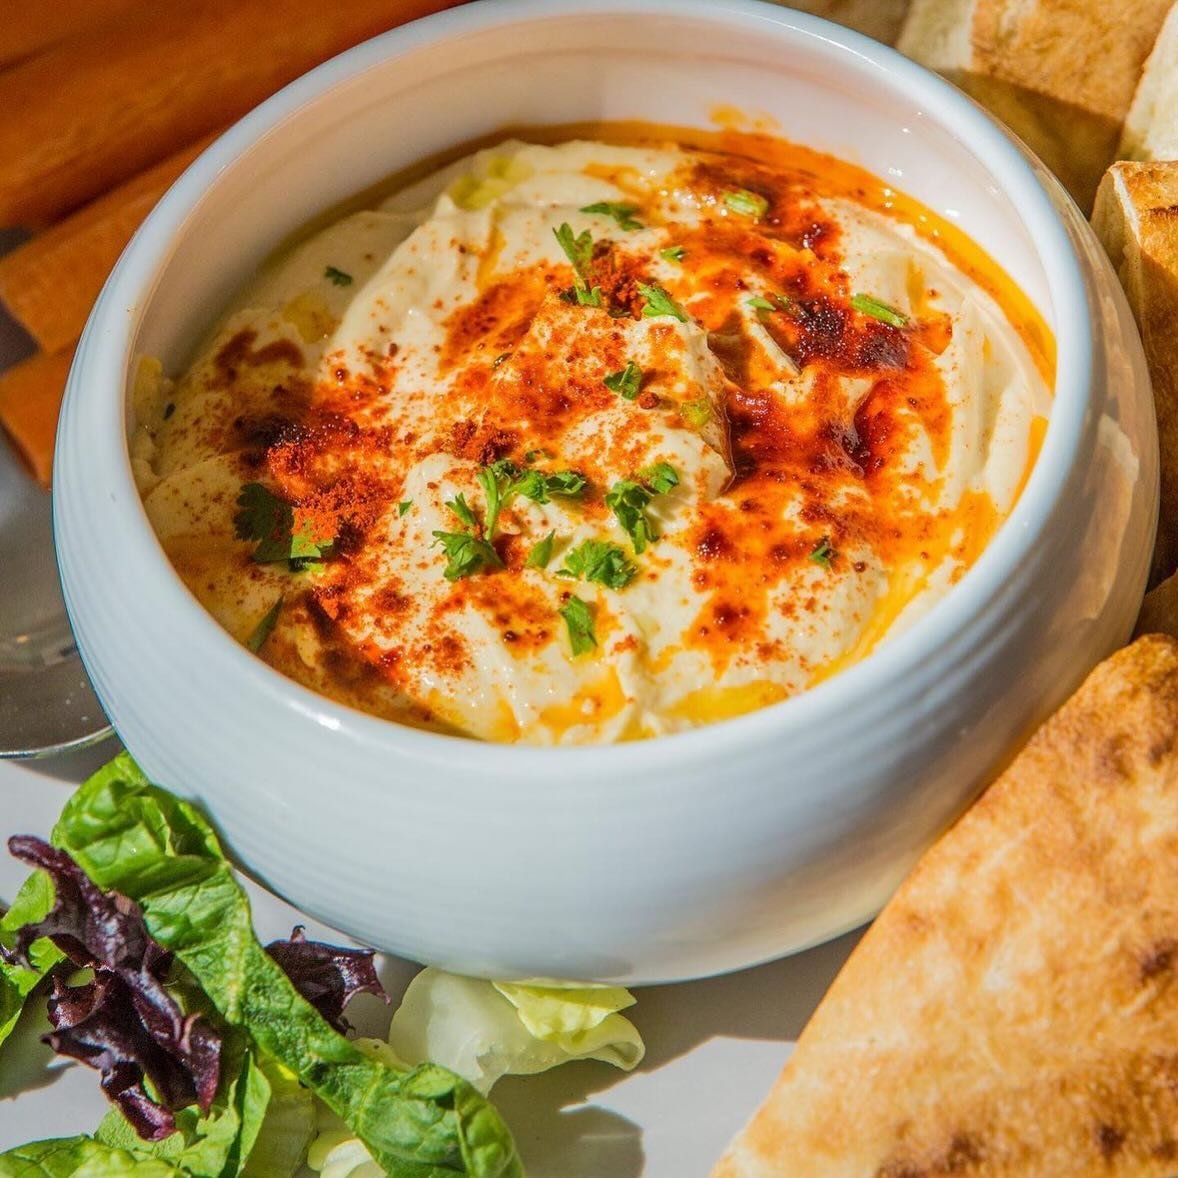 We have had many different dishes on our menu throughout the years. However, one dish that will always remain is hummus. Made with chickpeas and tahini, it is entirely vegan. Join us from Tuesday to Saturday, between 11 AM - 9 PM (10 PM on Fridays an